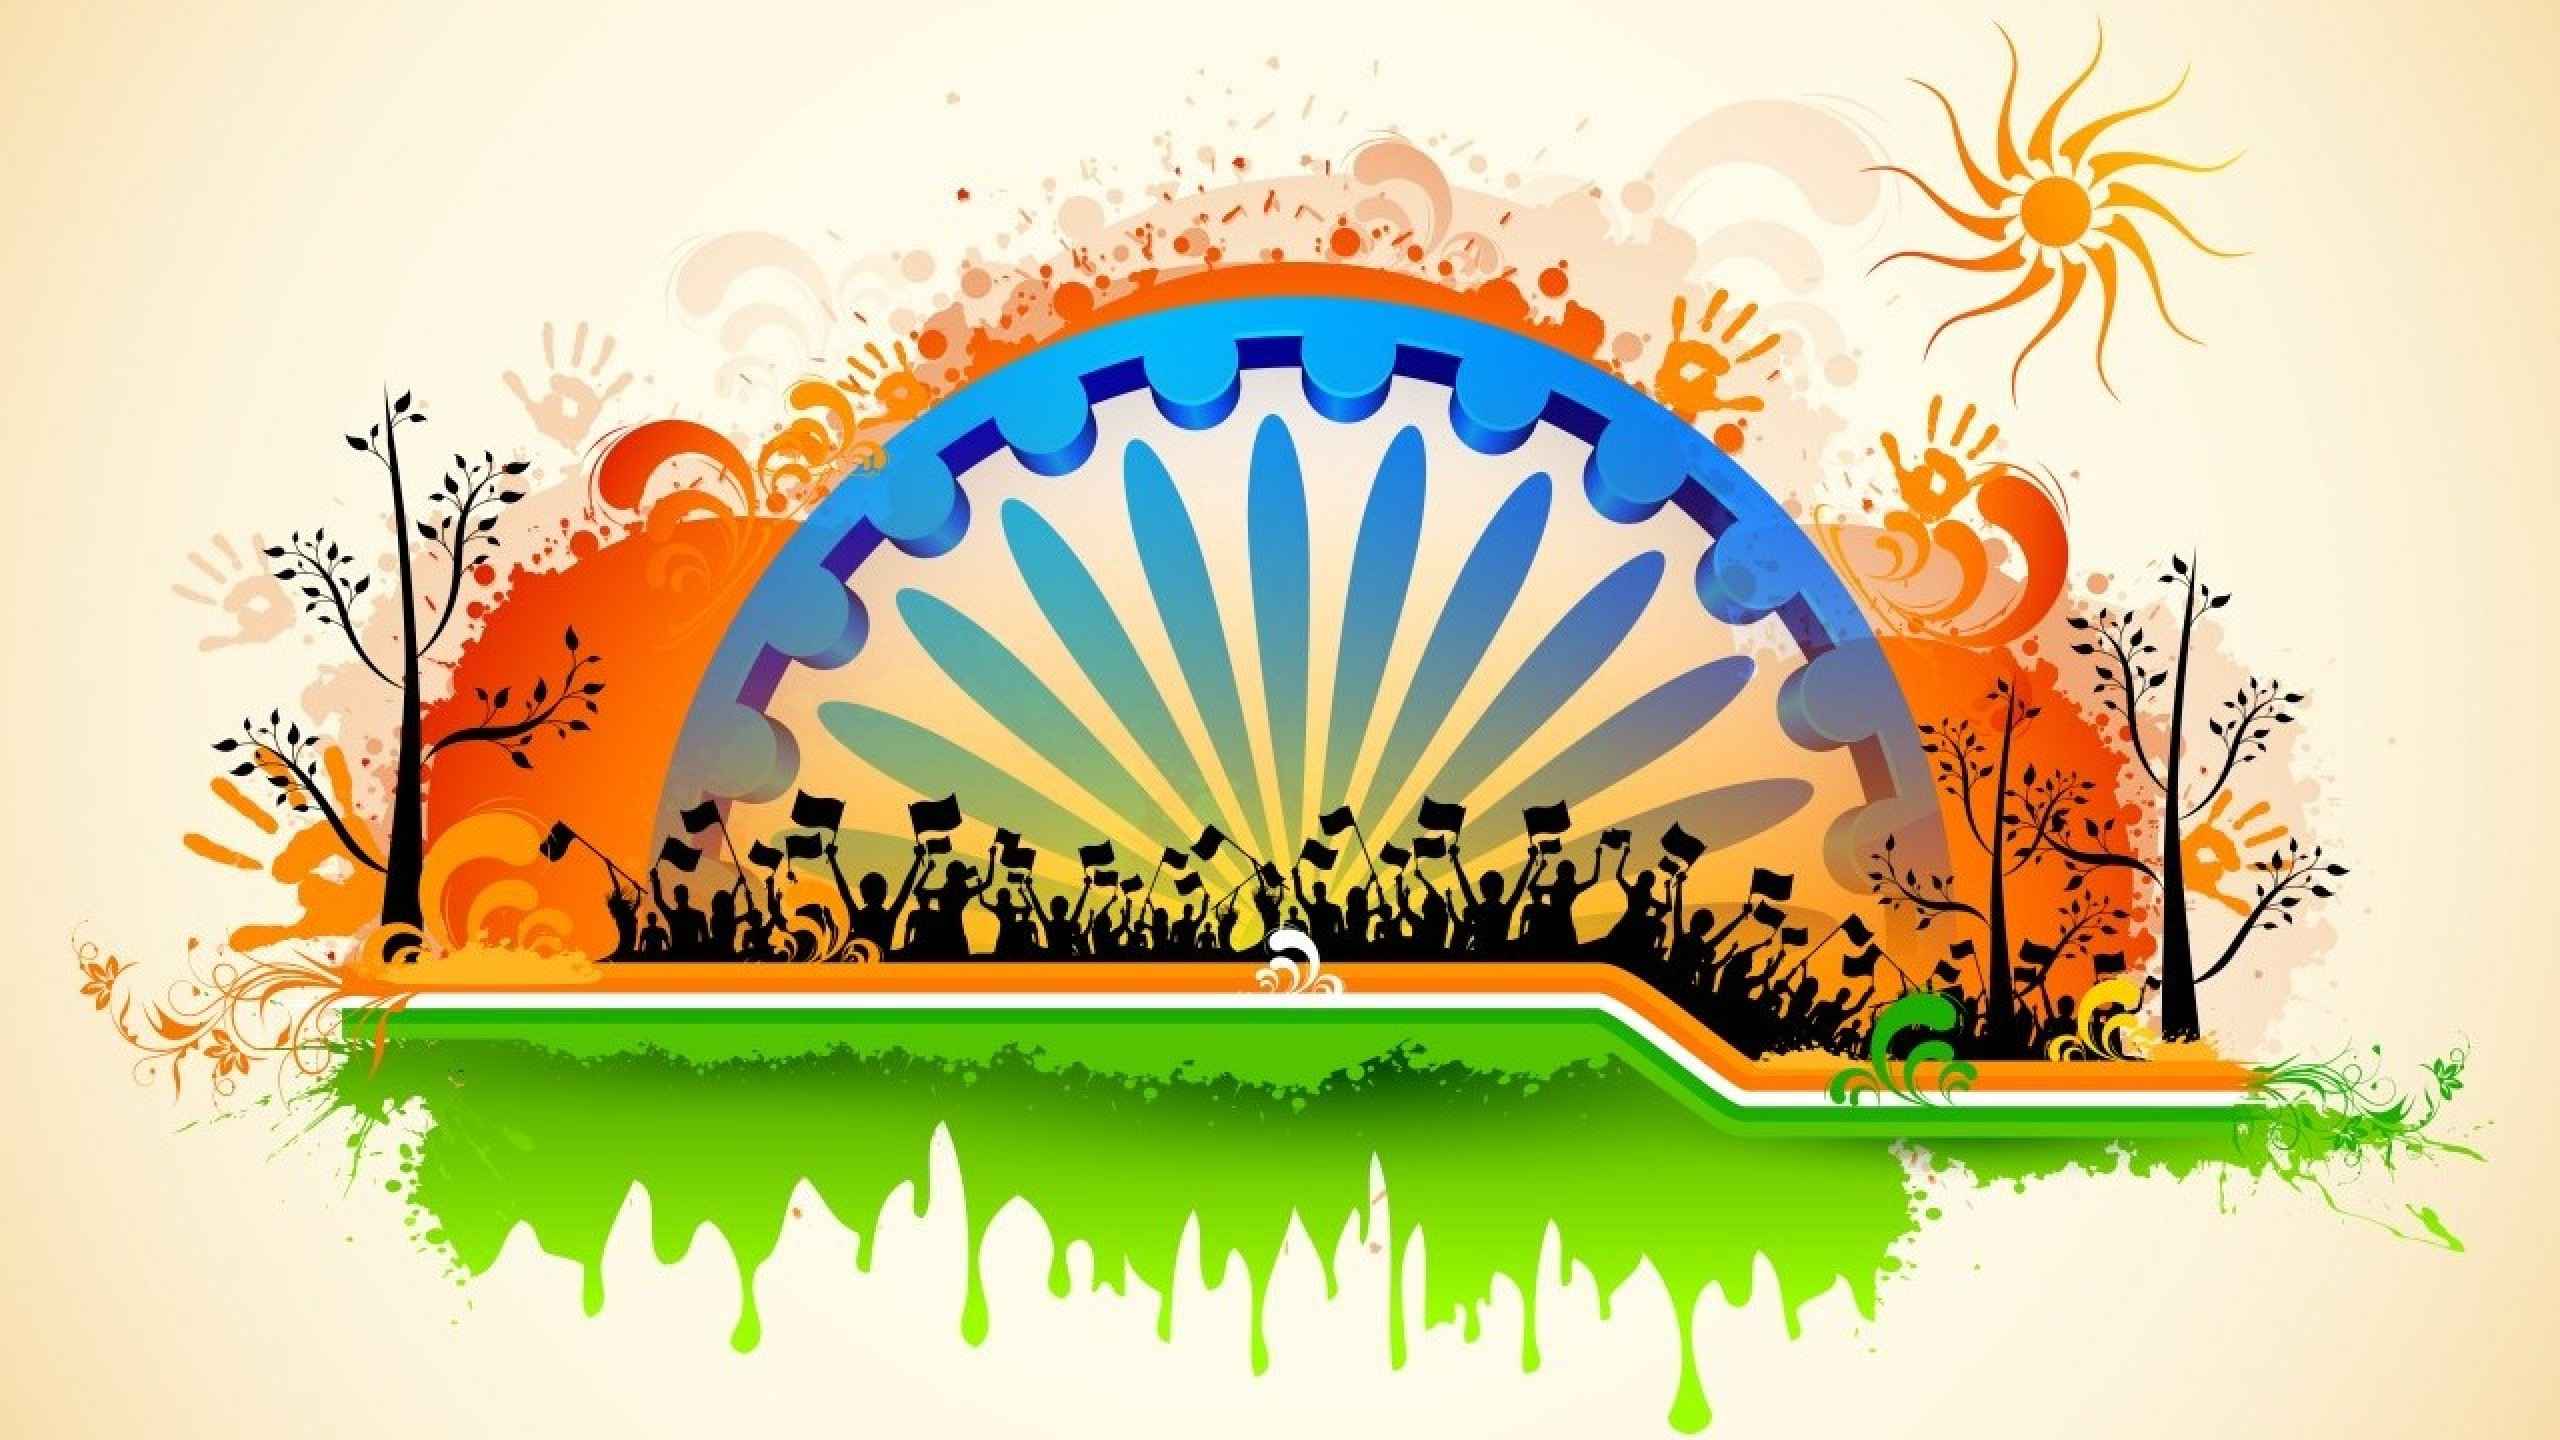 Happy Republic Day 2022 Wallpapers - Wallpaper Cave